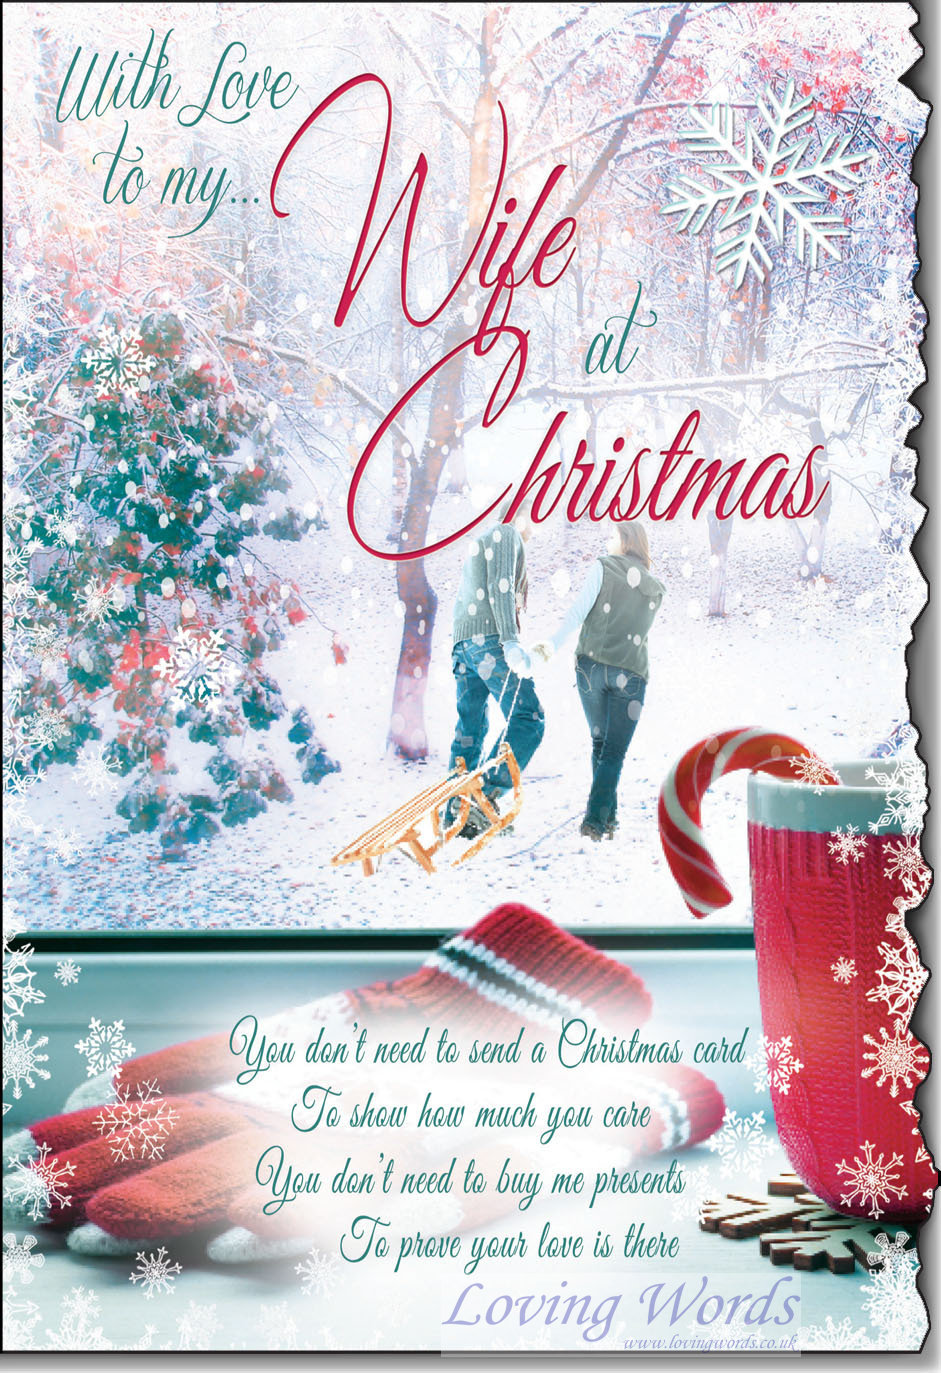 With Love to my Wife at Christmas Greeting Cards by Loving Words